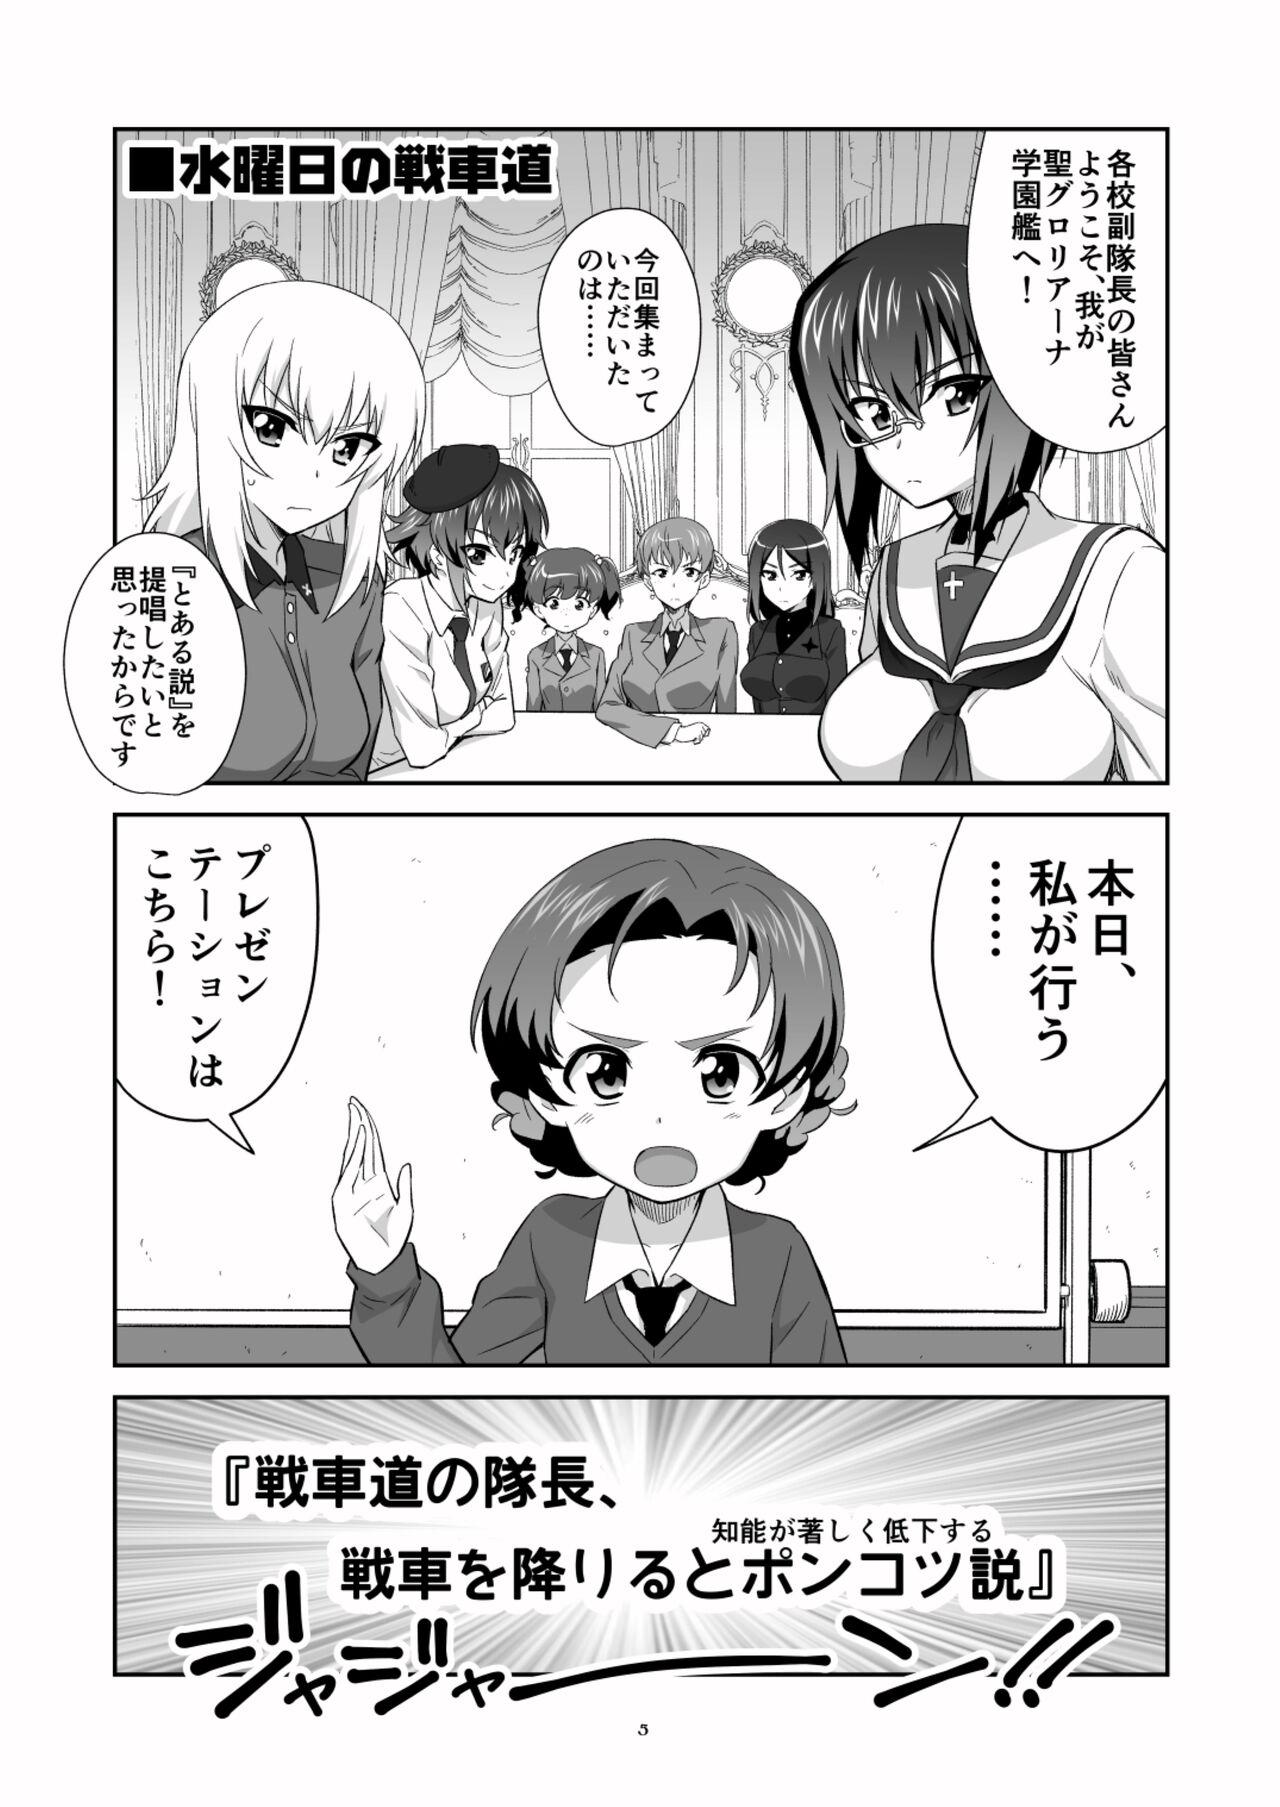 Mommy TURIME-DO 4 - Girls und panzer T Girl - Page 5